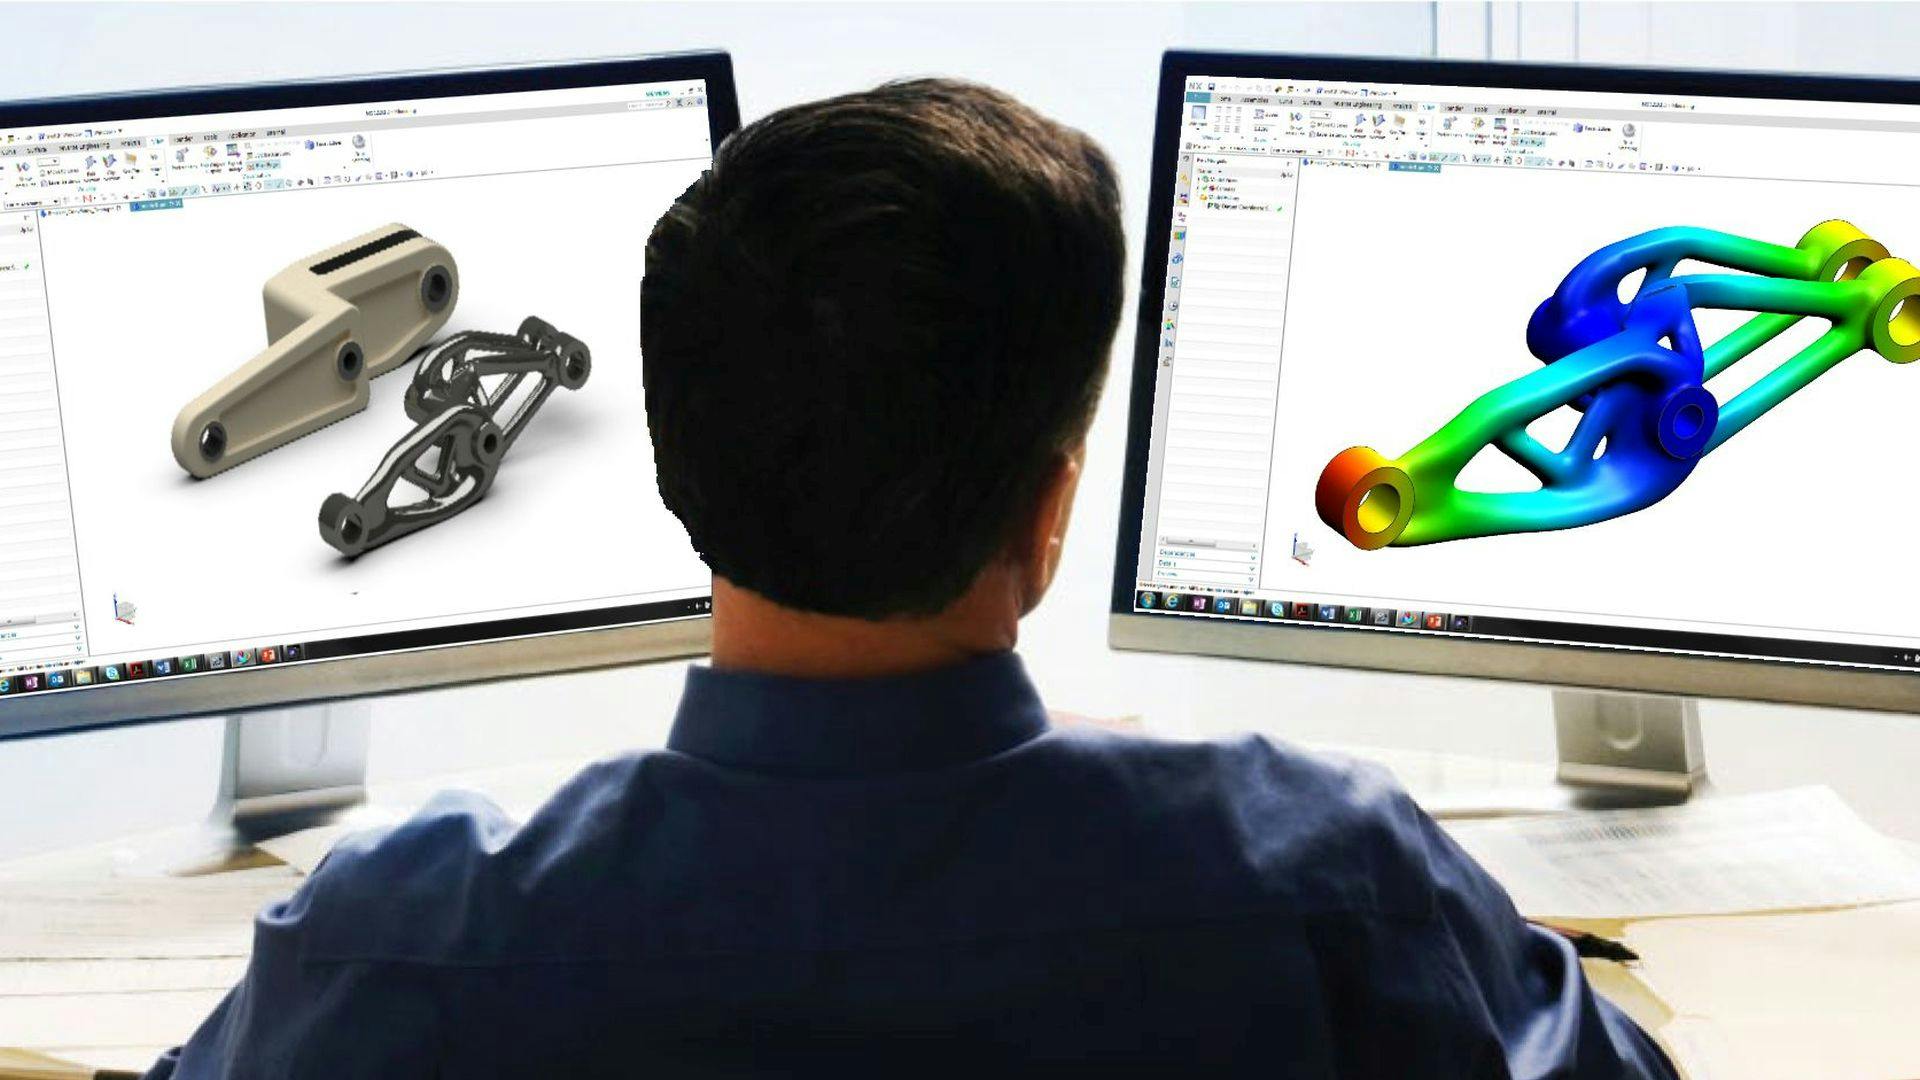 Industrializing additive manufacturing through an integrated end-to-end process